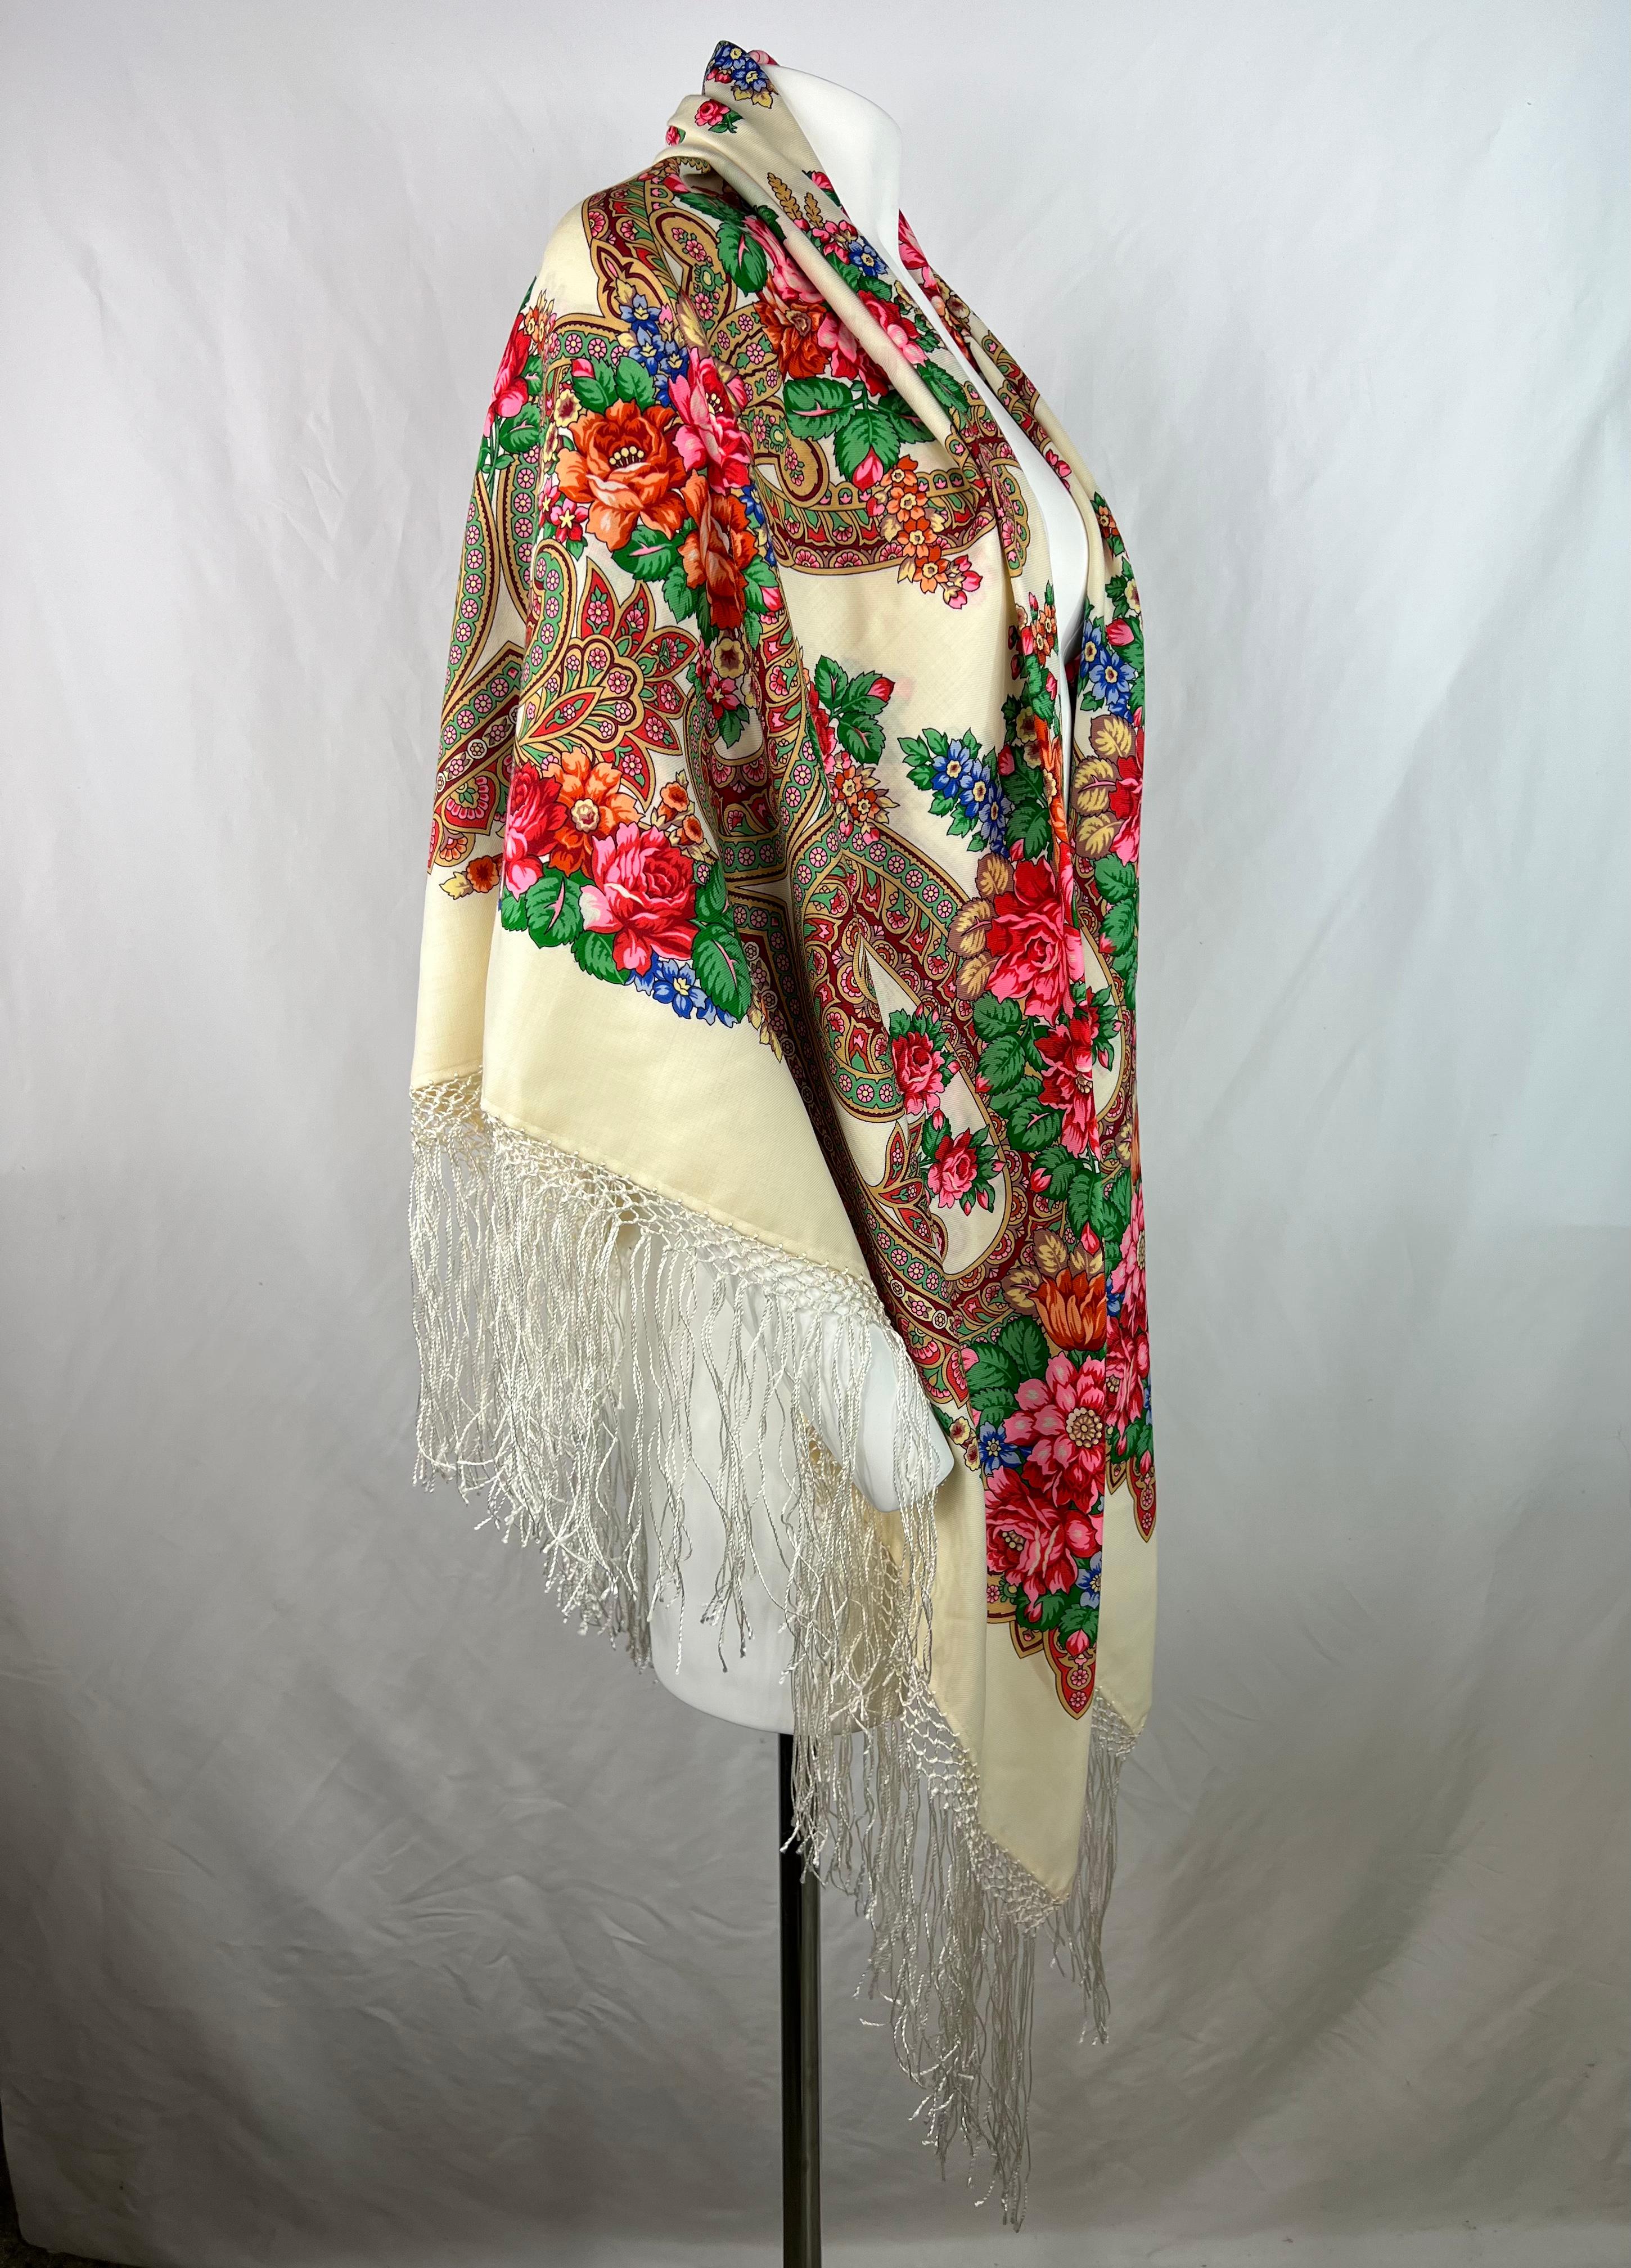 Product details:

The scarf features multicolored floral print with silk fringe detail, measures 10 inches long.